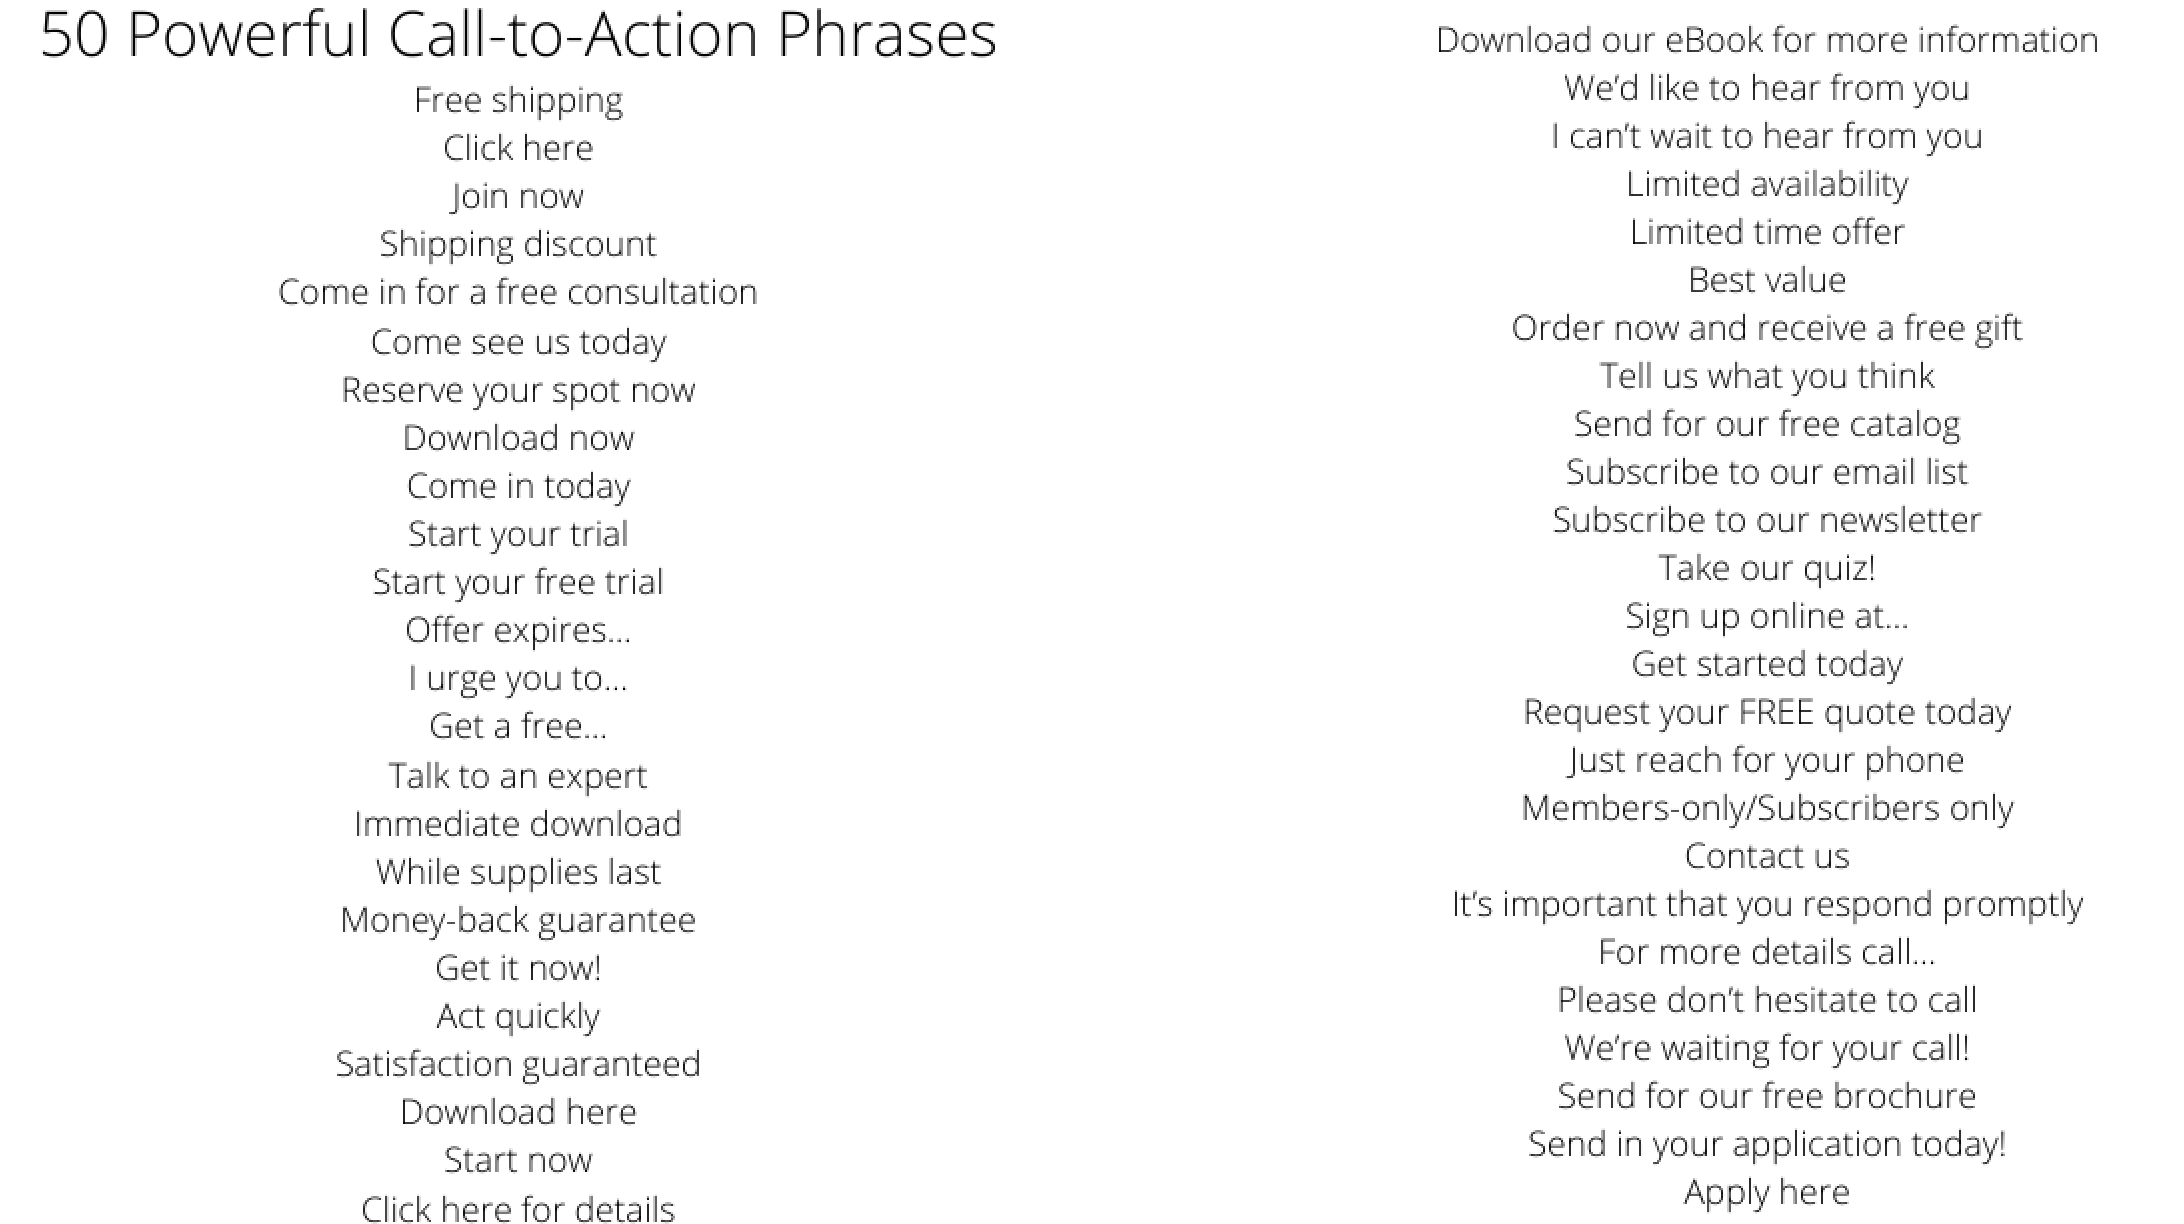 50 powerful Call to action (CTA) phrases